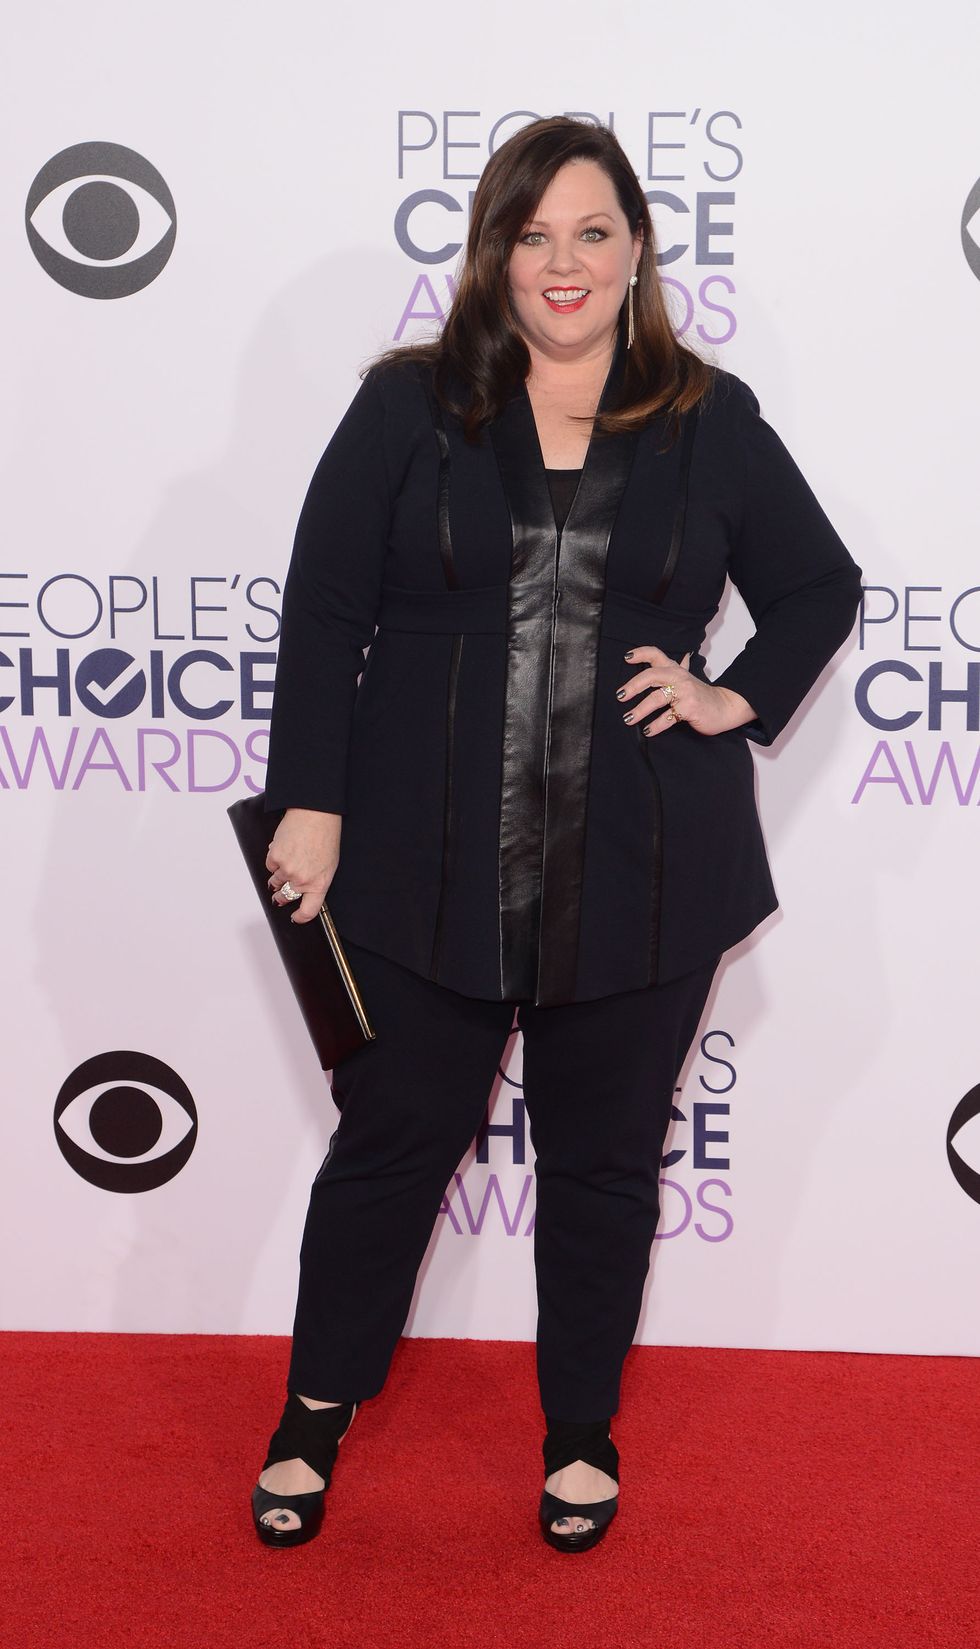 Melissa Mccarthy at the 2015 People's Choice Awards